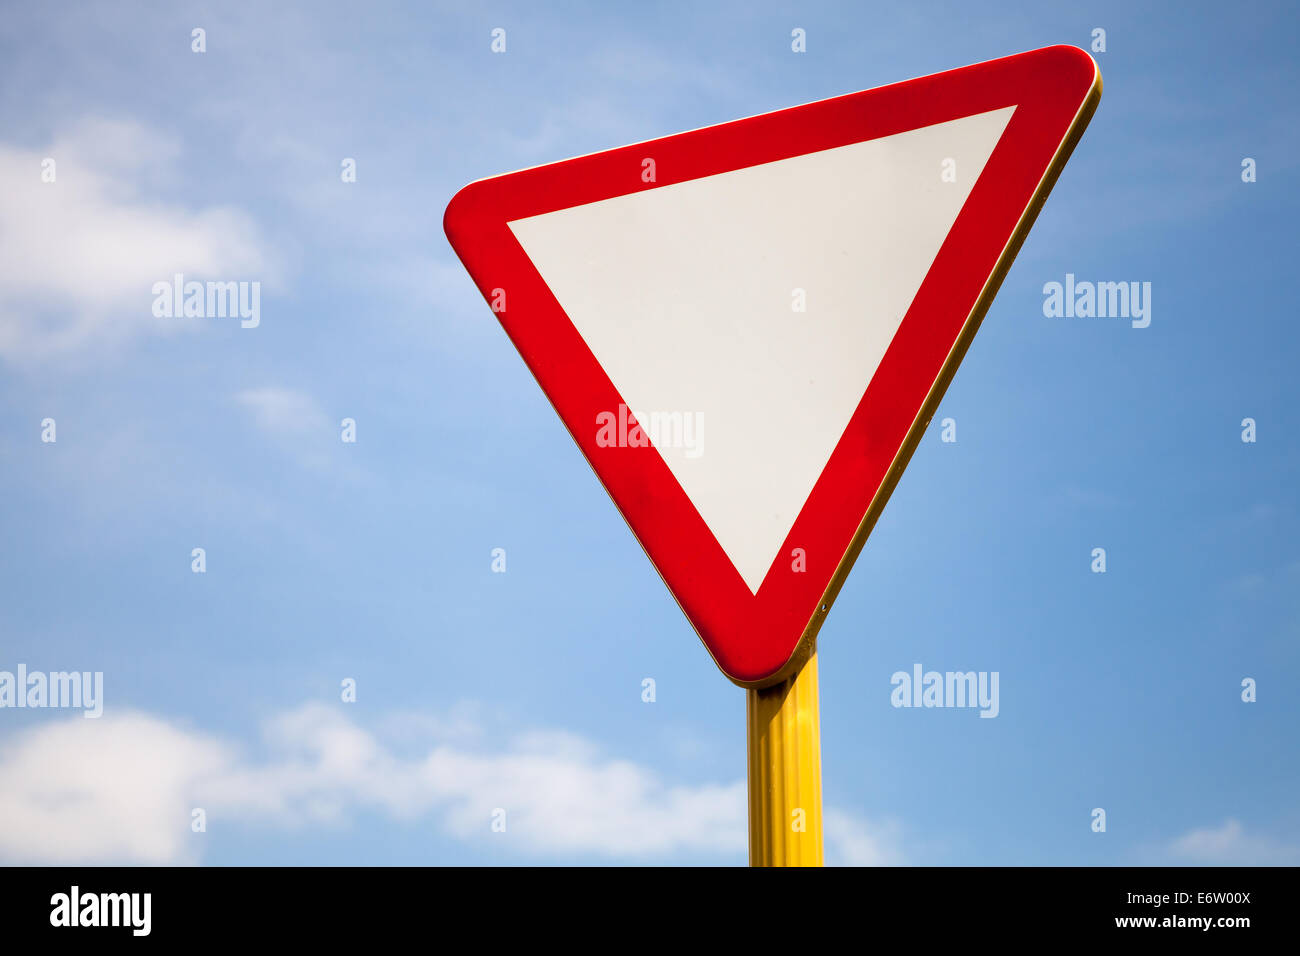 Give way road sign above cloudy sky Stock Photo